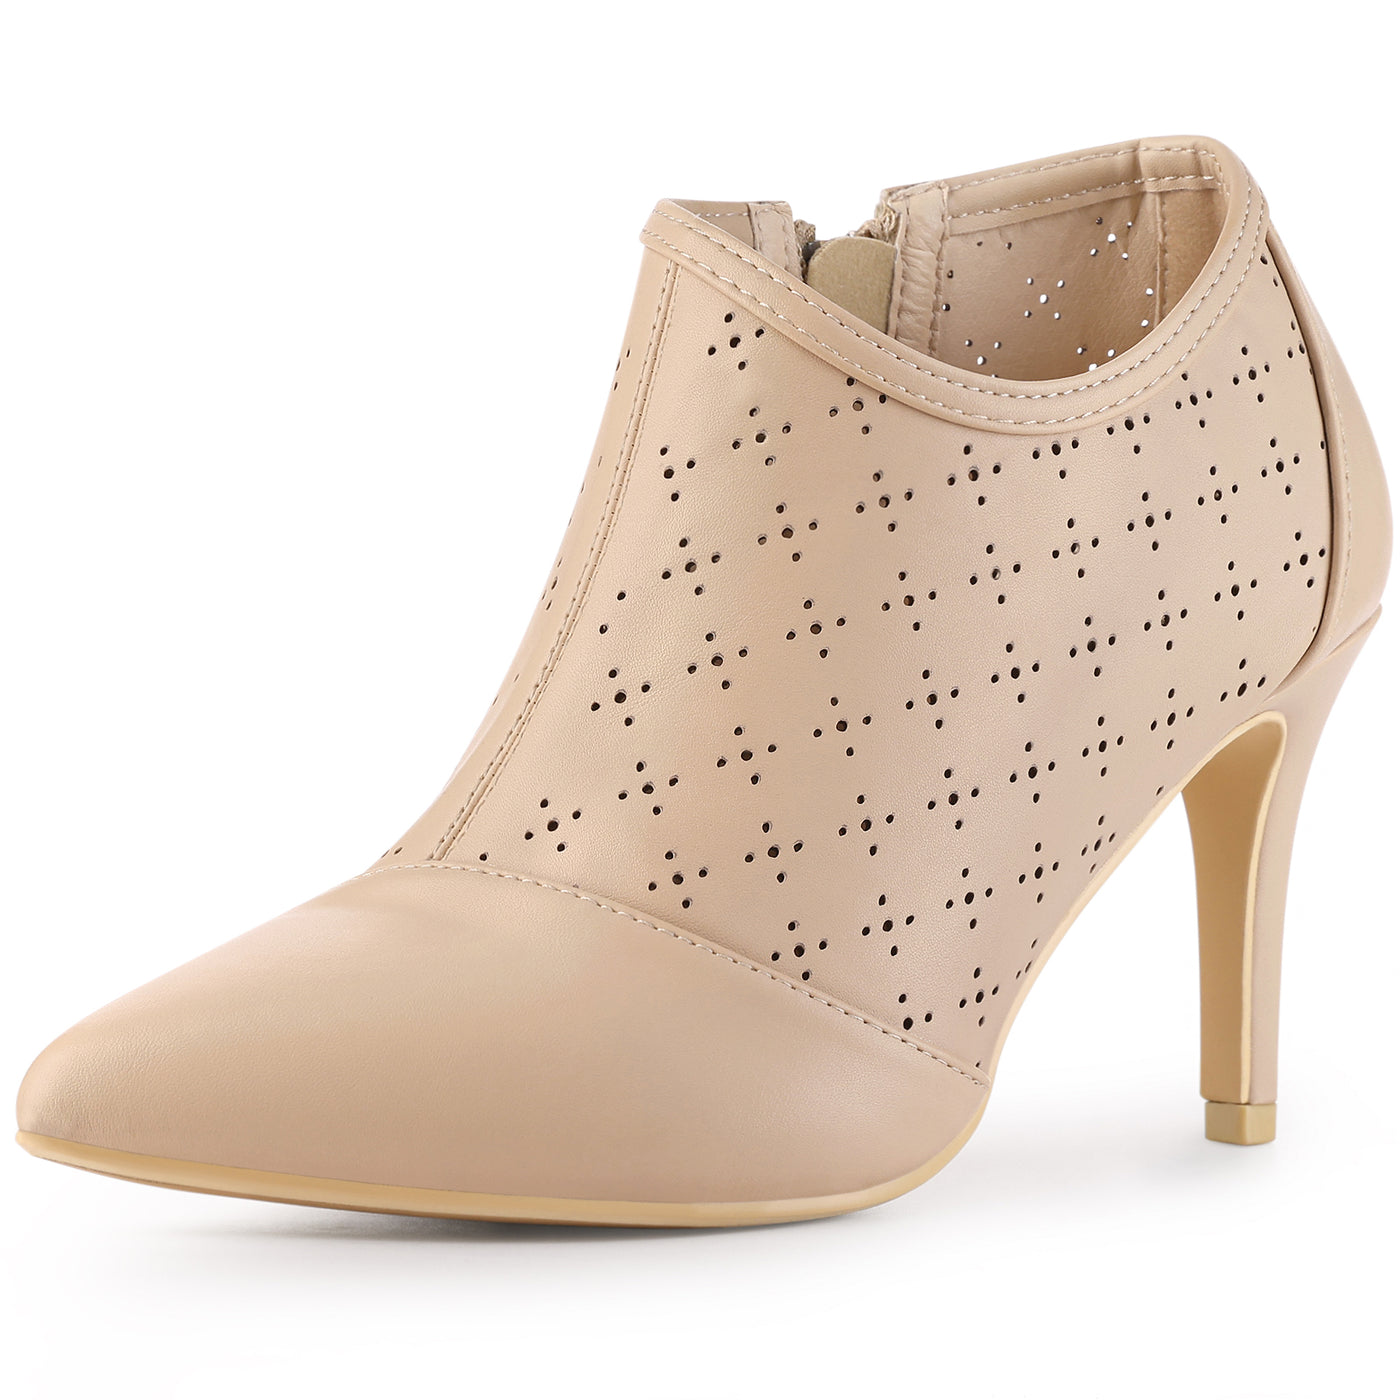 Bublédon Perphy Perforated Pointed Toe Zipper Stiletto Heels Ankle Boots for Women